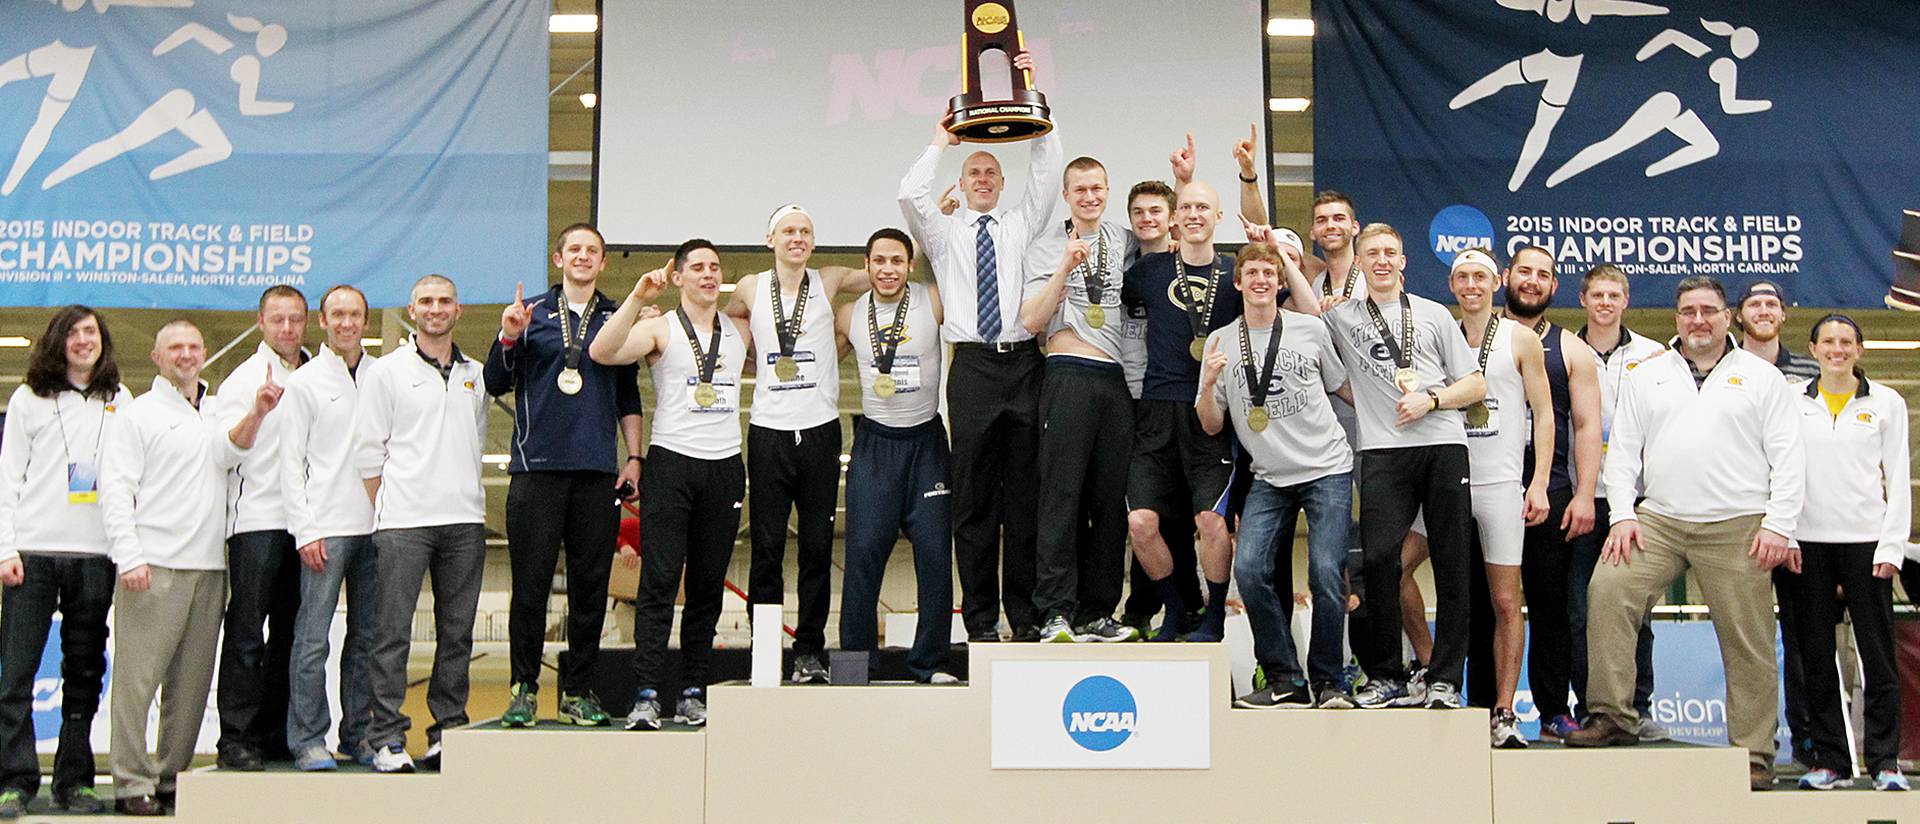 National Champions: Blugold Men's Indoor Track and Field